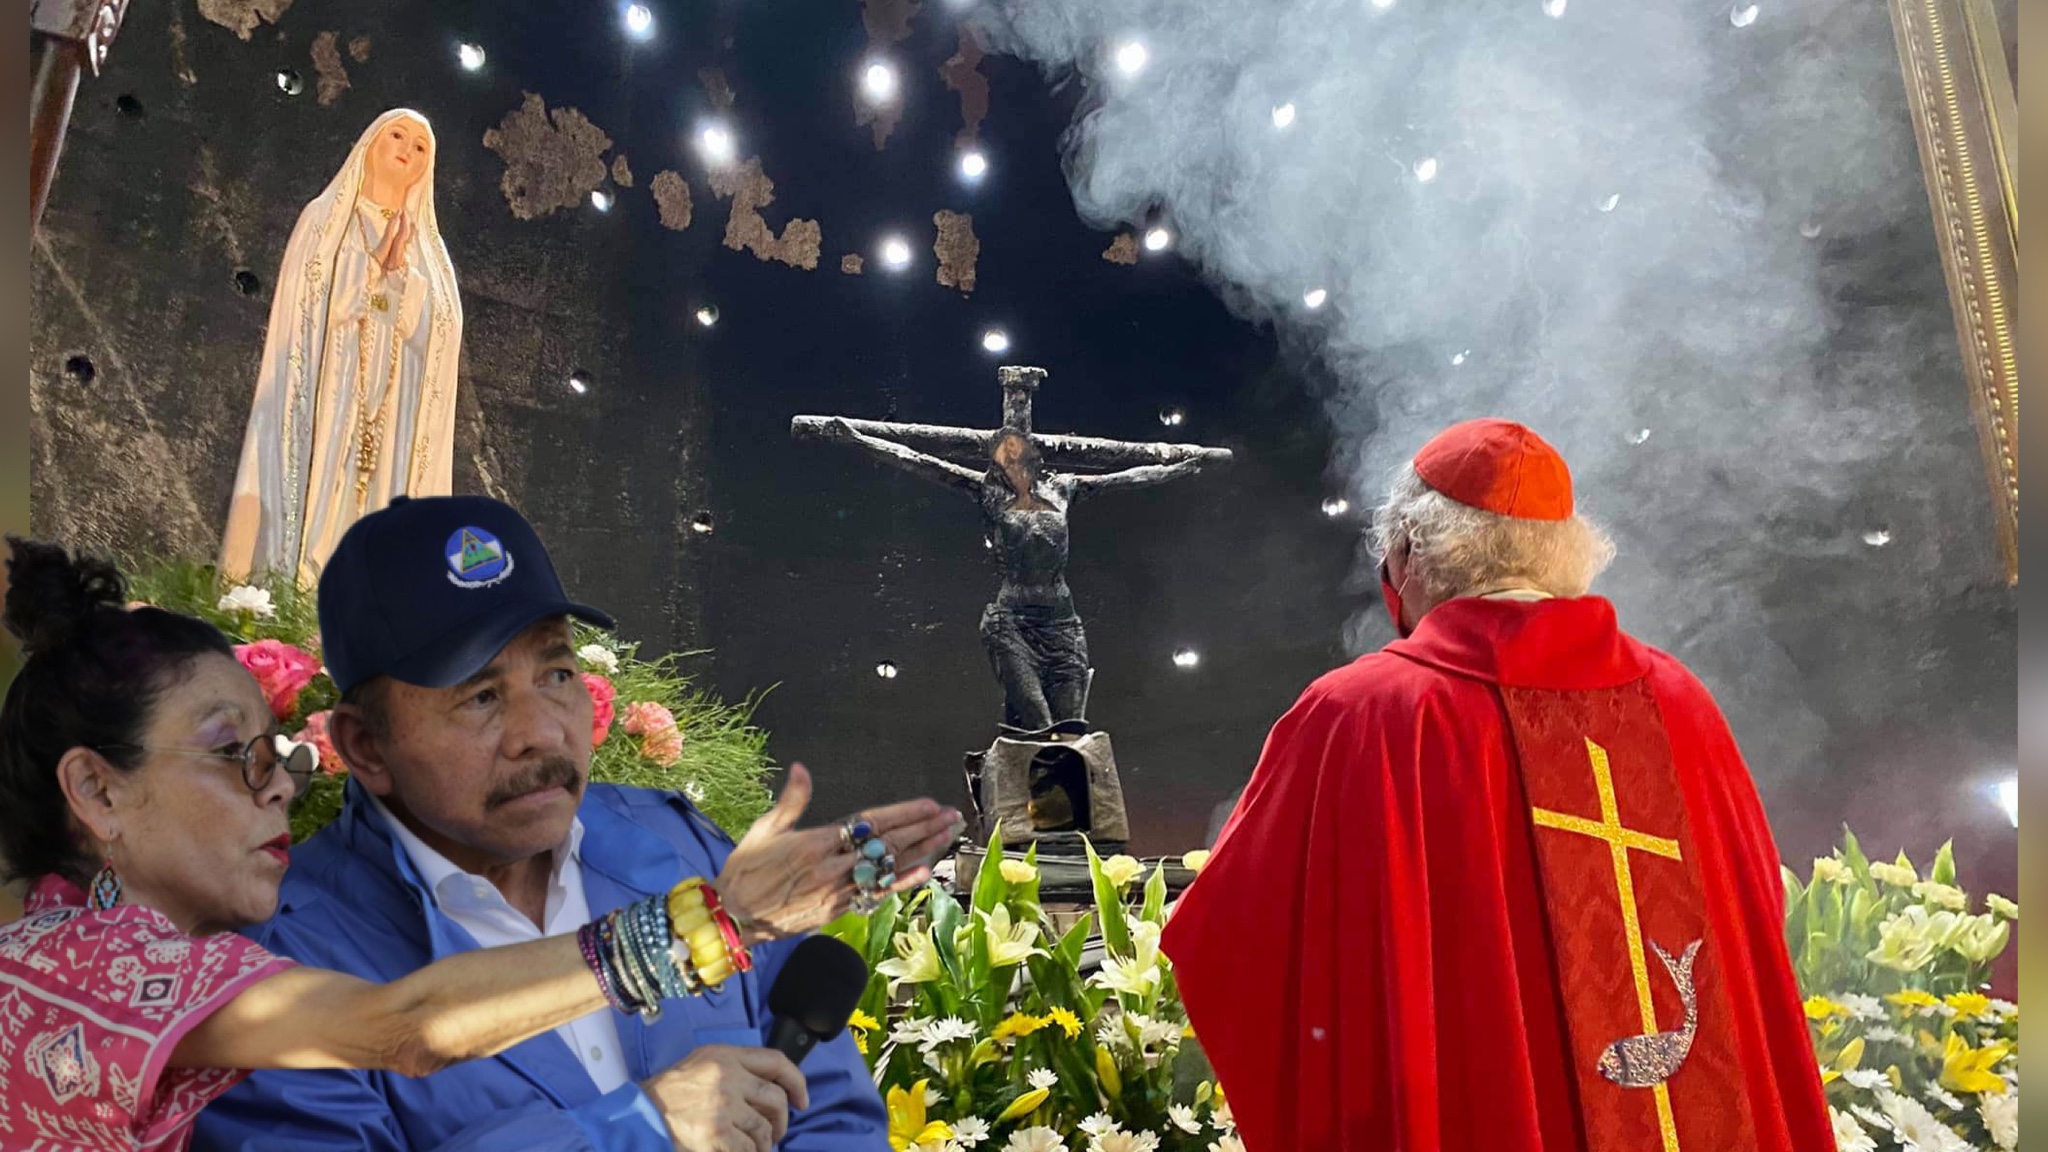 Ortega and Murillo are excommunicated "in fact" by the Church